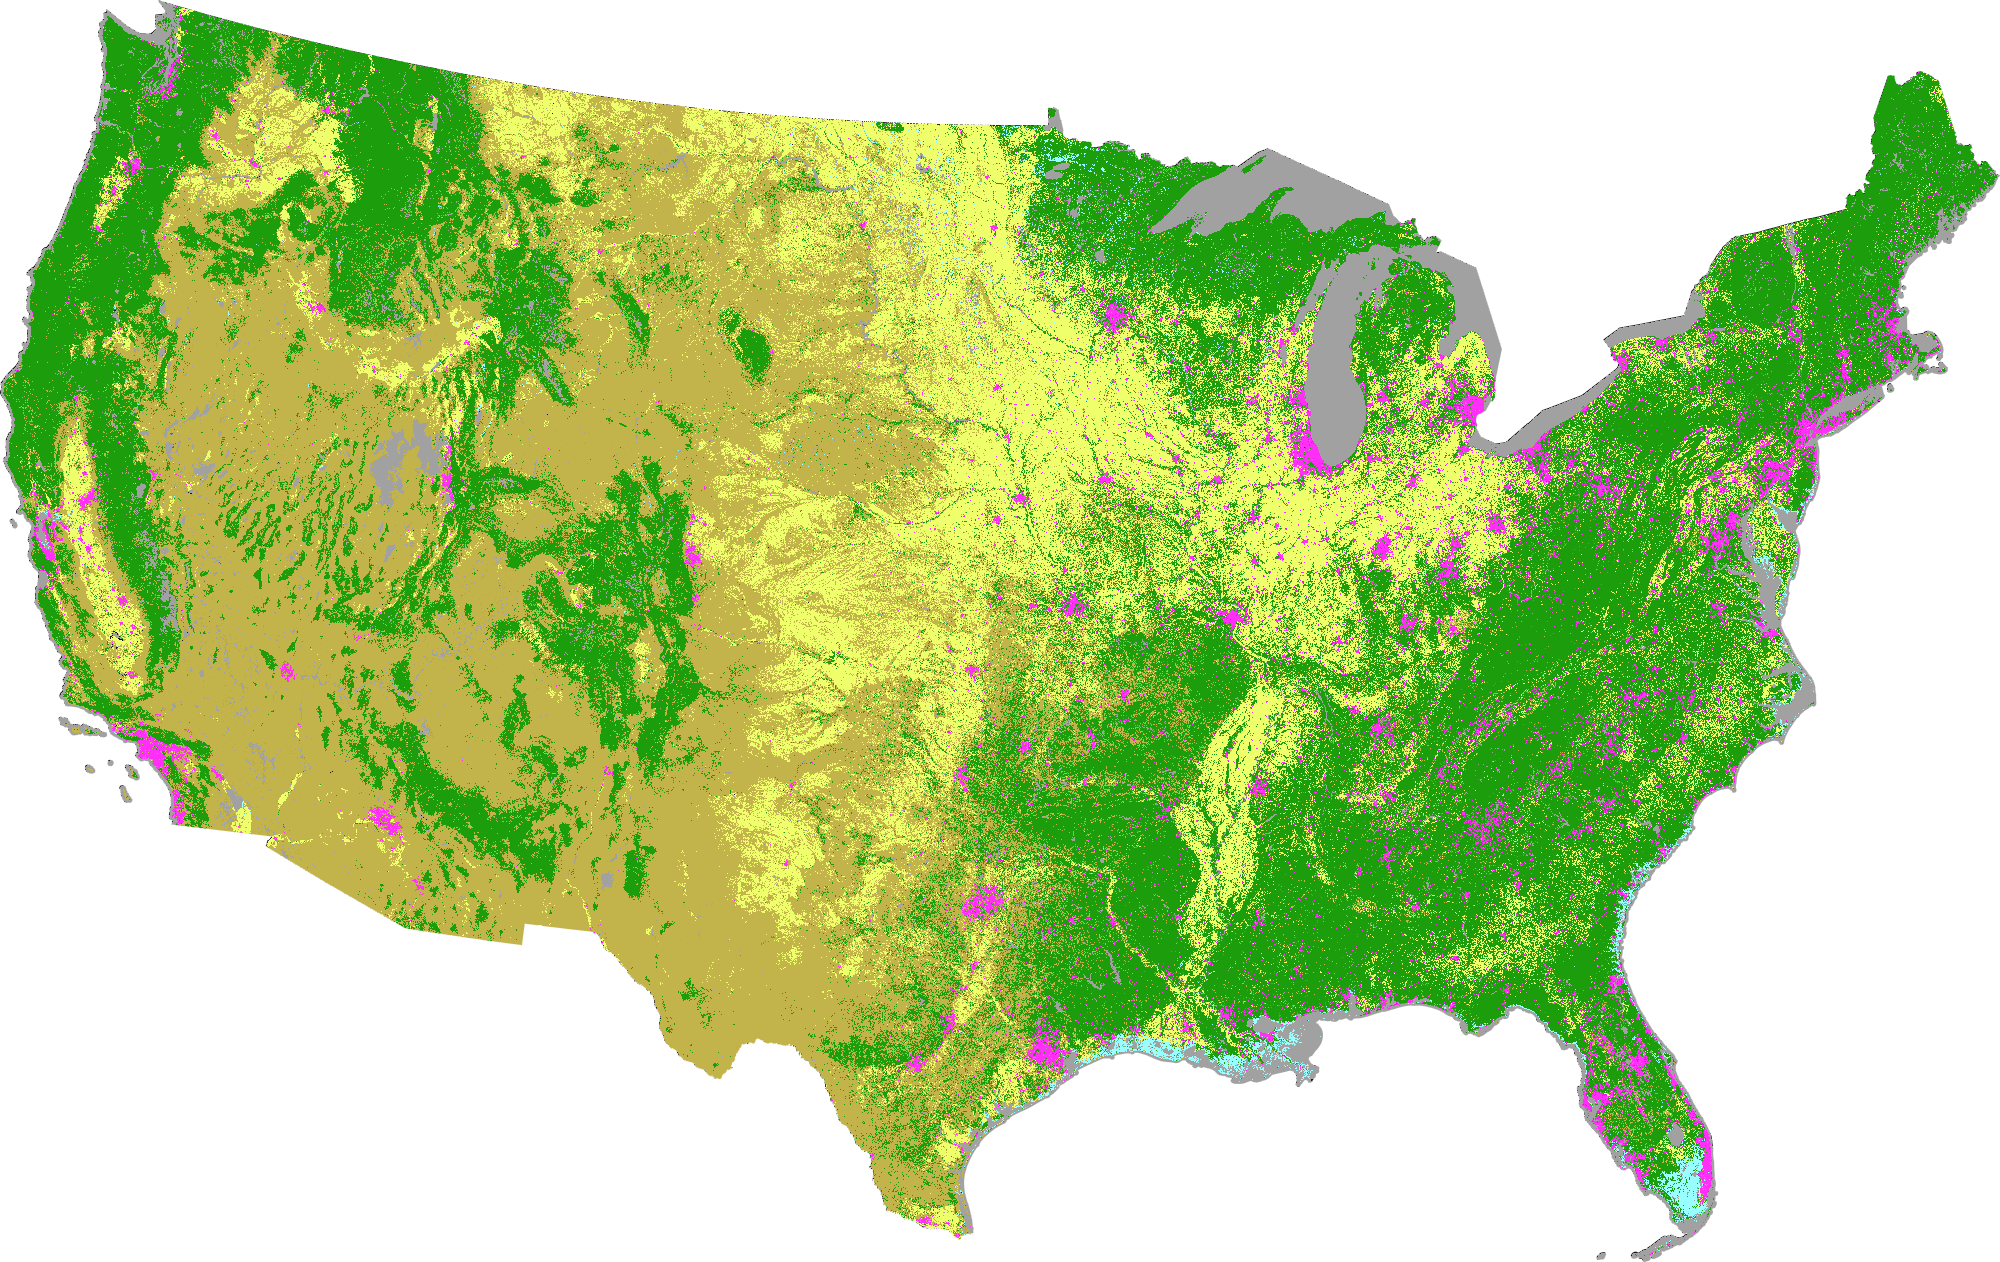 Map of LCMS Land Use output across the U.S.